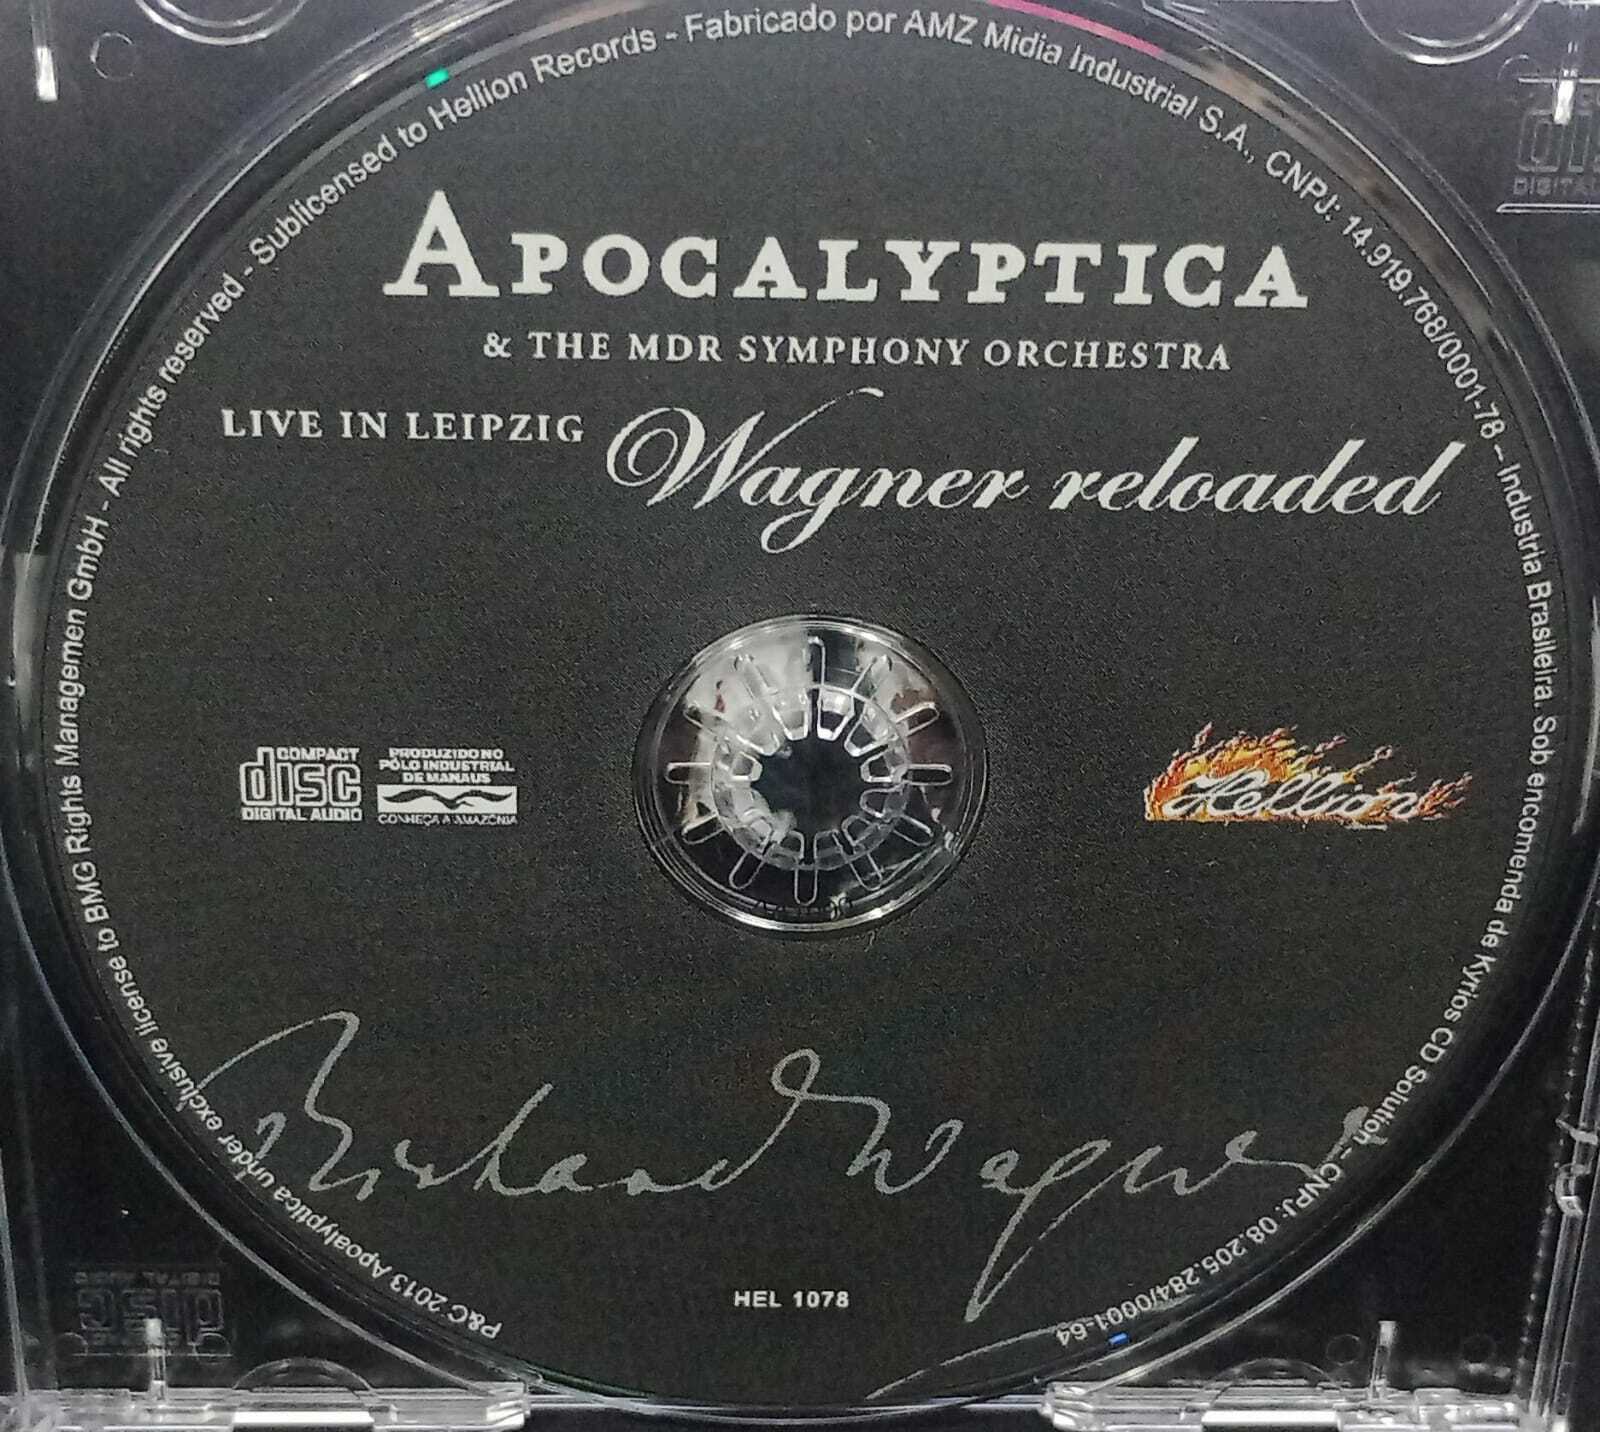 CD - Apocalyptica - And The MDR Symphony Orchestra Wagner Reloaded Live In Leipzig